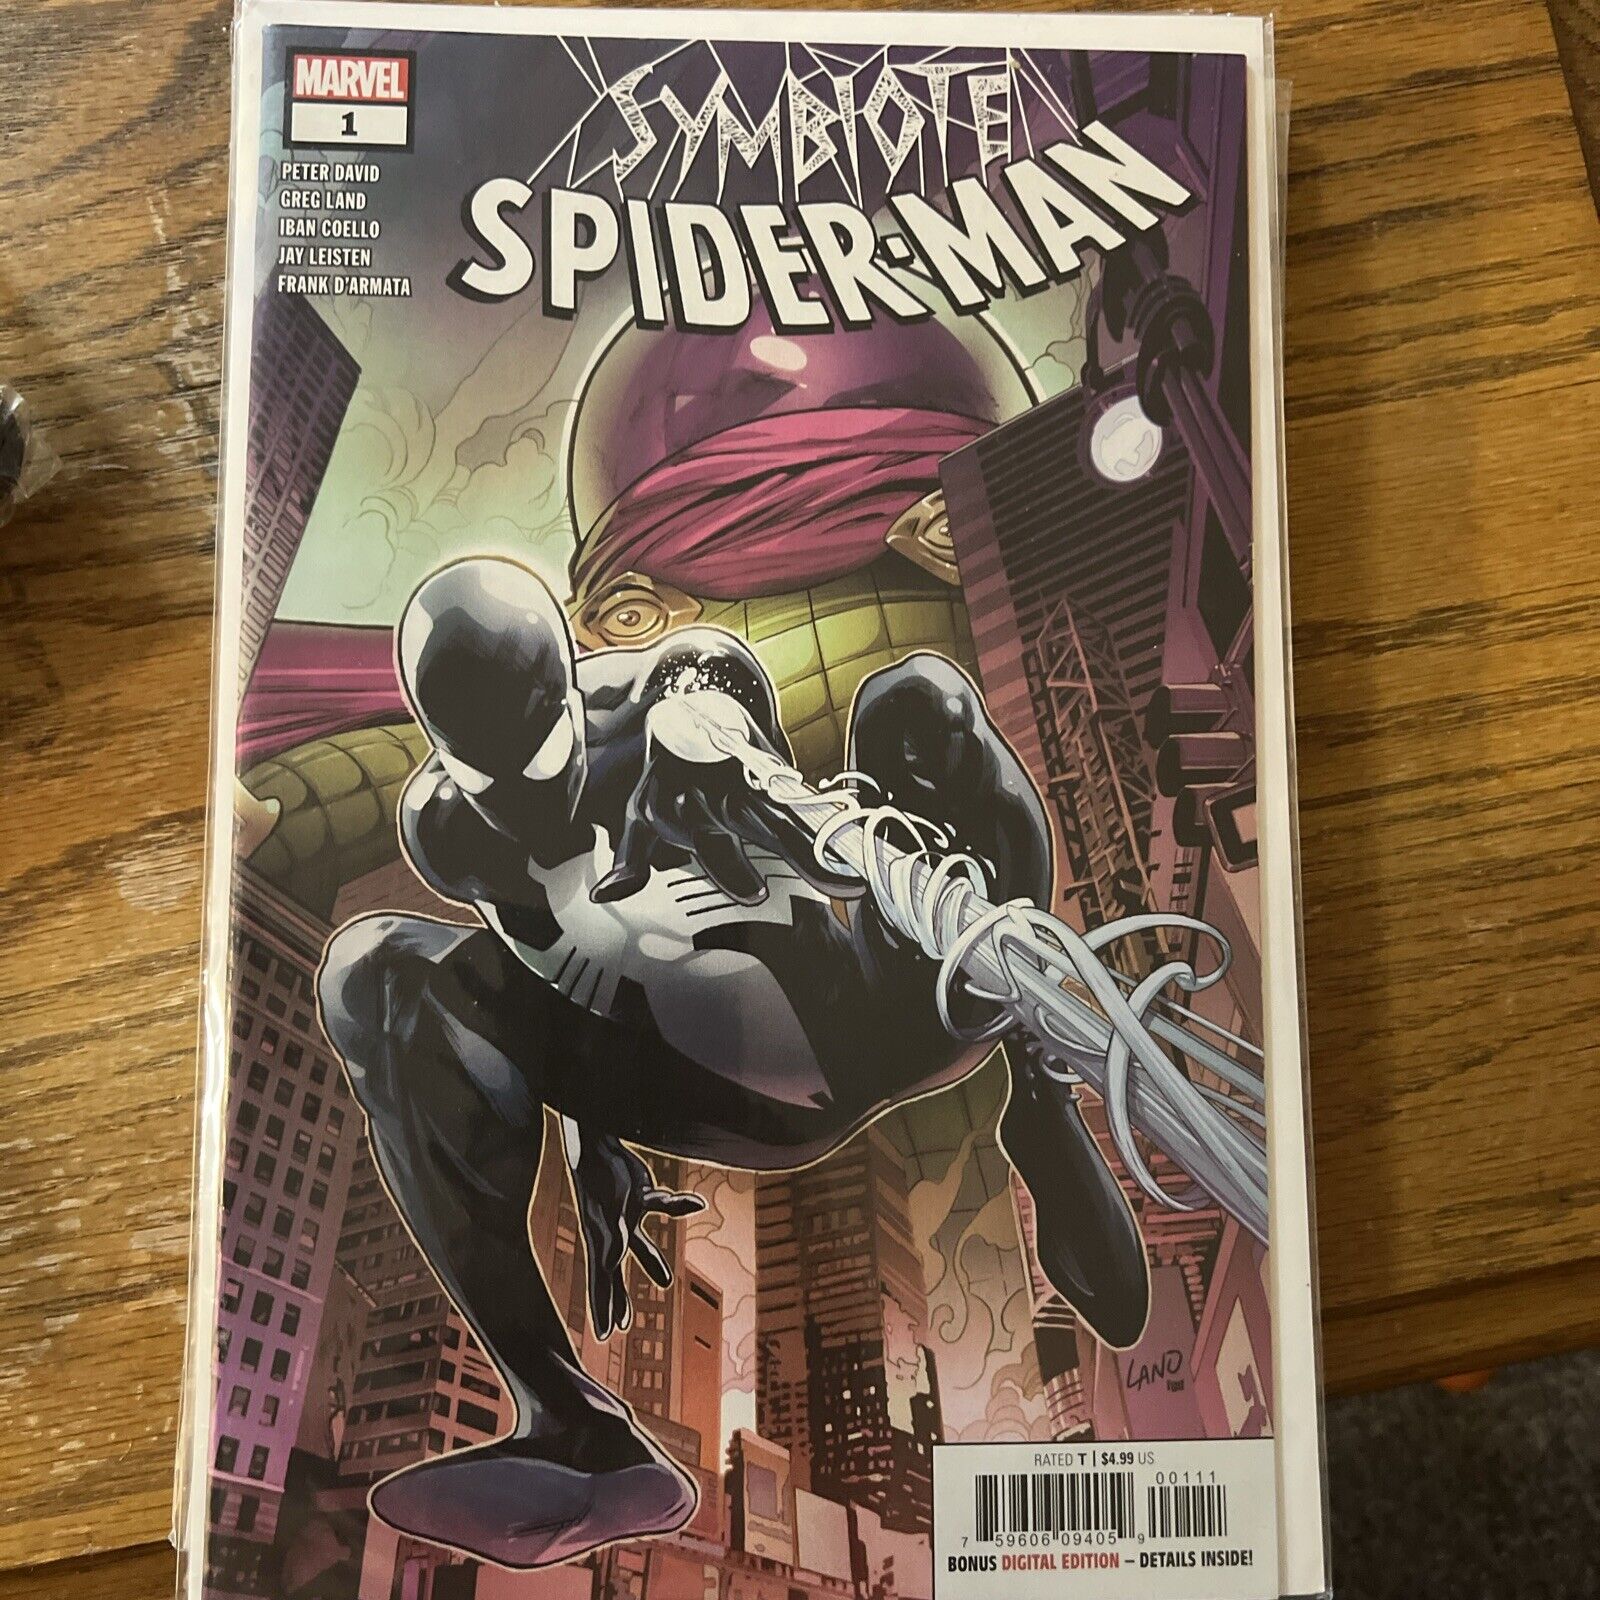 Symbiote Spider-Man Issues 1-5 (Marvel Comics 2019) High Grade. Read Once.